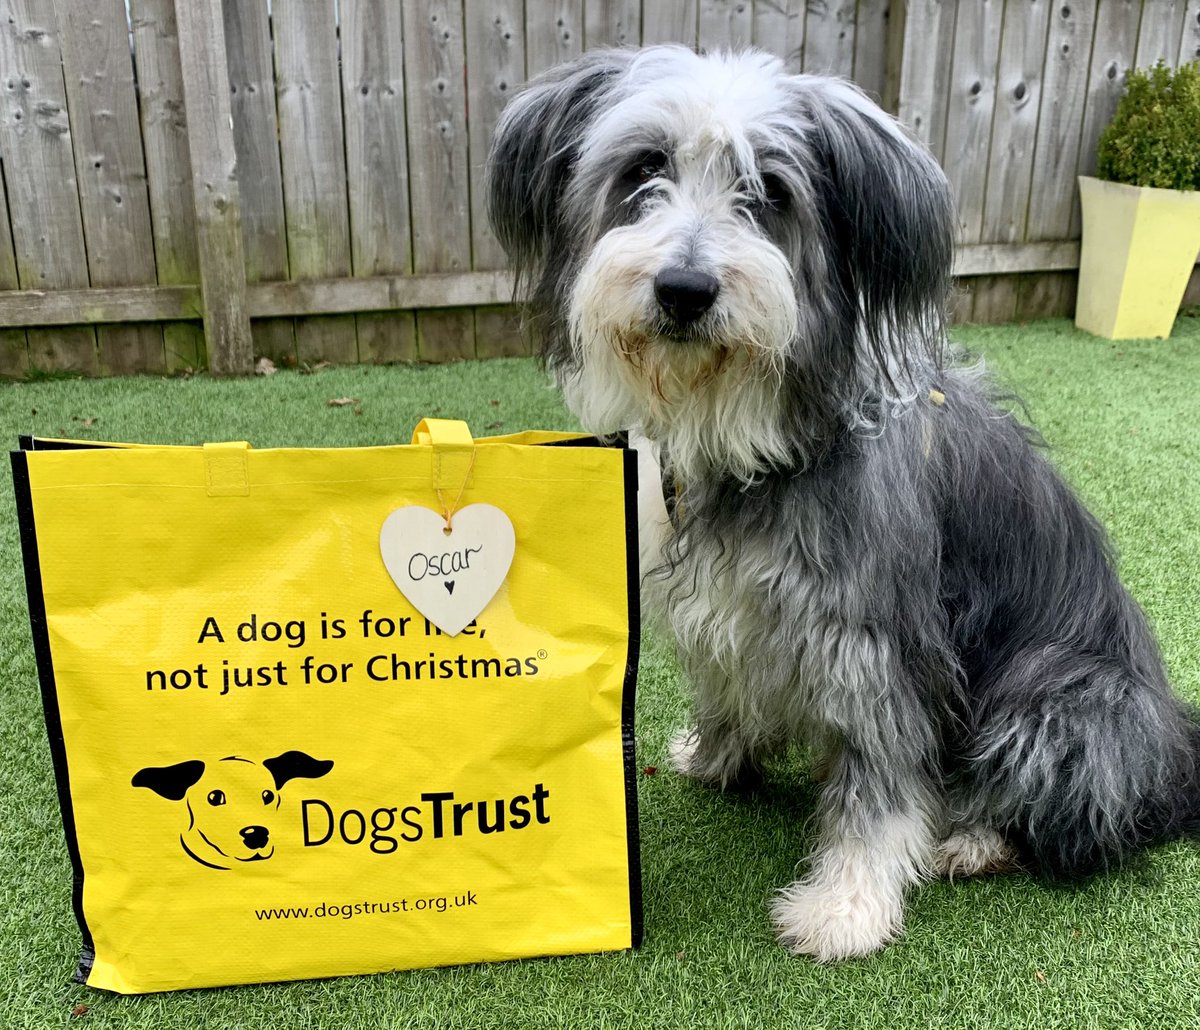 Handsome Oscar🐶 was more than happy to wake up early today for his #BigYellowBagDay. He bid his foster carer farewell with a wave of his paw 🐾 and off he went with his new family 💛

@dogstrust 
#AdoptDontShop
#ADogIsForLife
#Foster
#HomefromHome
#BeardedCollie